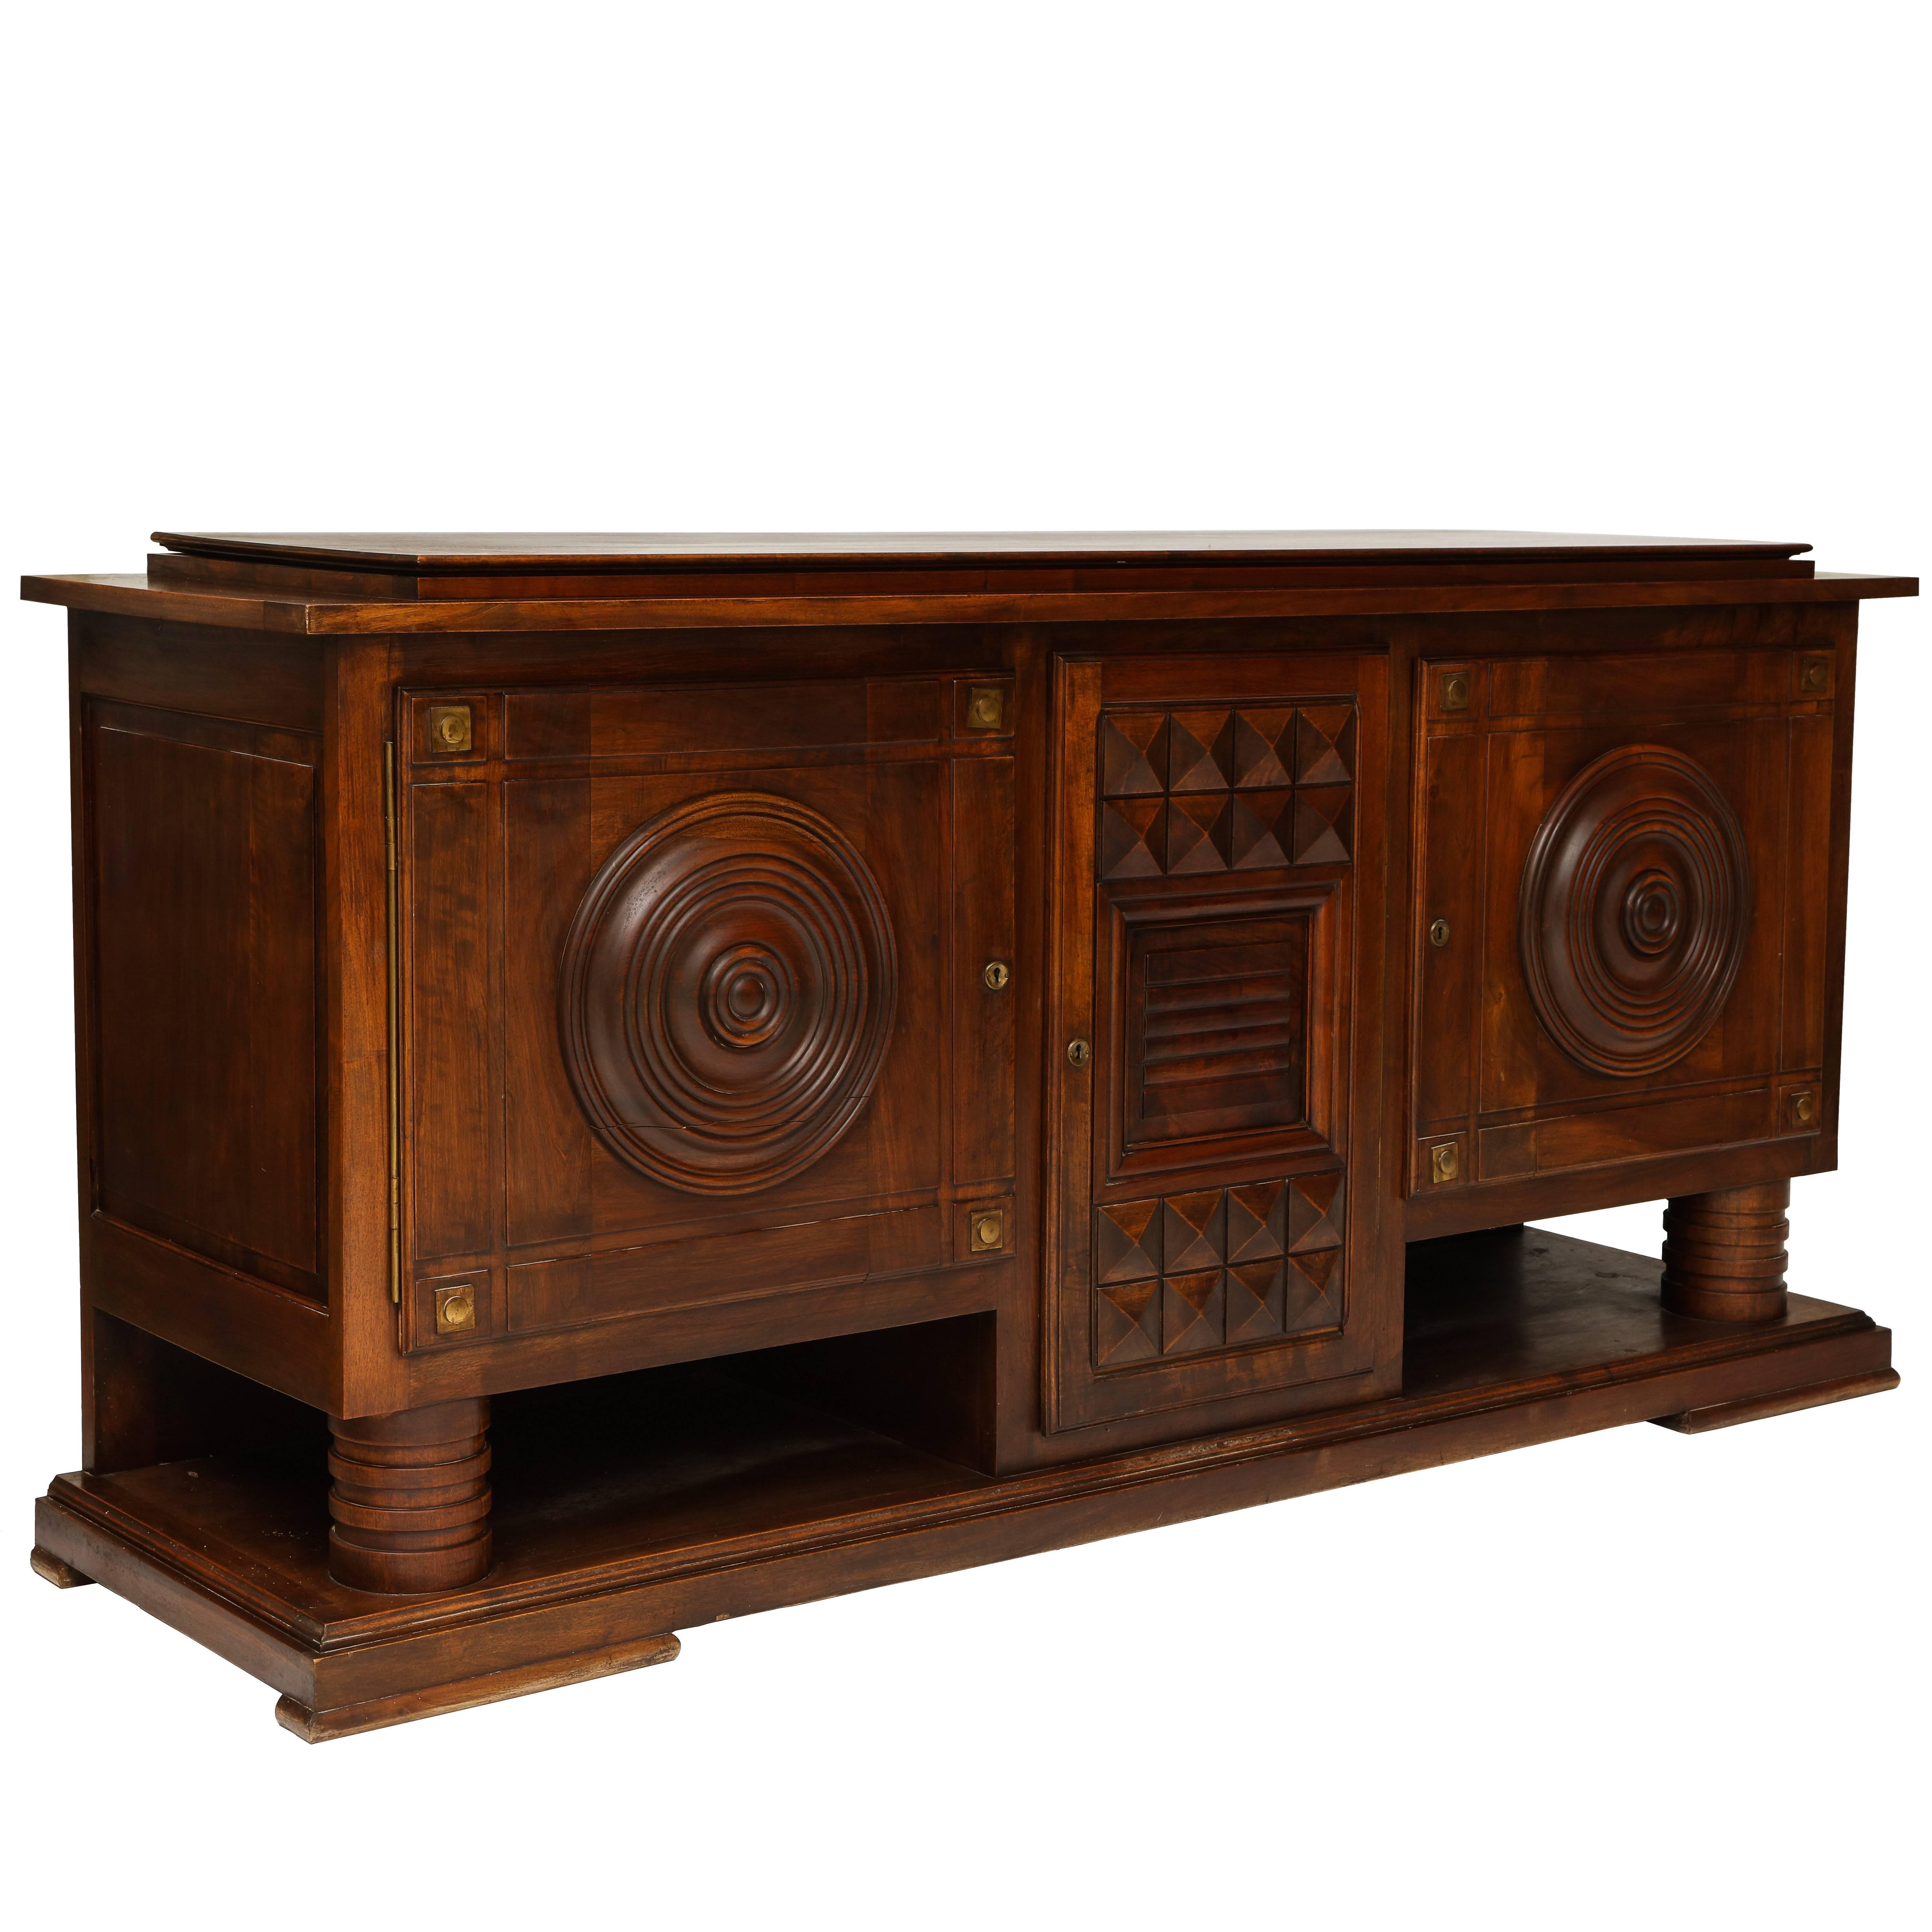 Charles Dudouyt Deco mahogany sideboard buffet, 1930s, France.

Beautiful condition and details mahogany sideboard with incredible carved details and bronze detail. Sculptural and geometric showpiece.

Width: 90 inches.
Height: 40